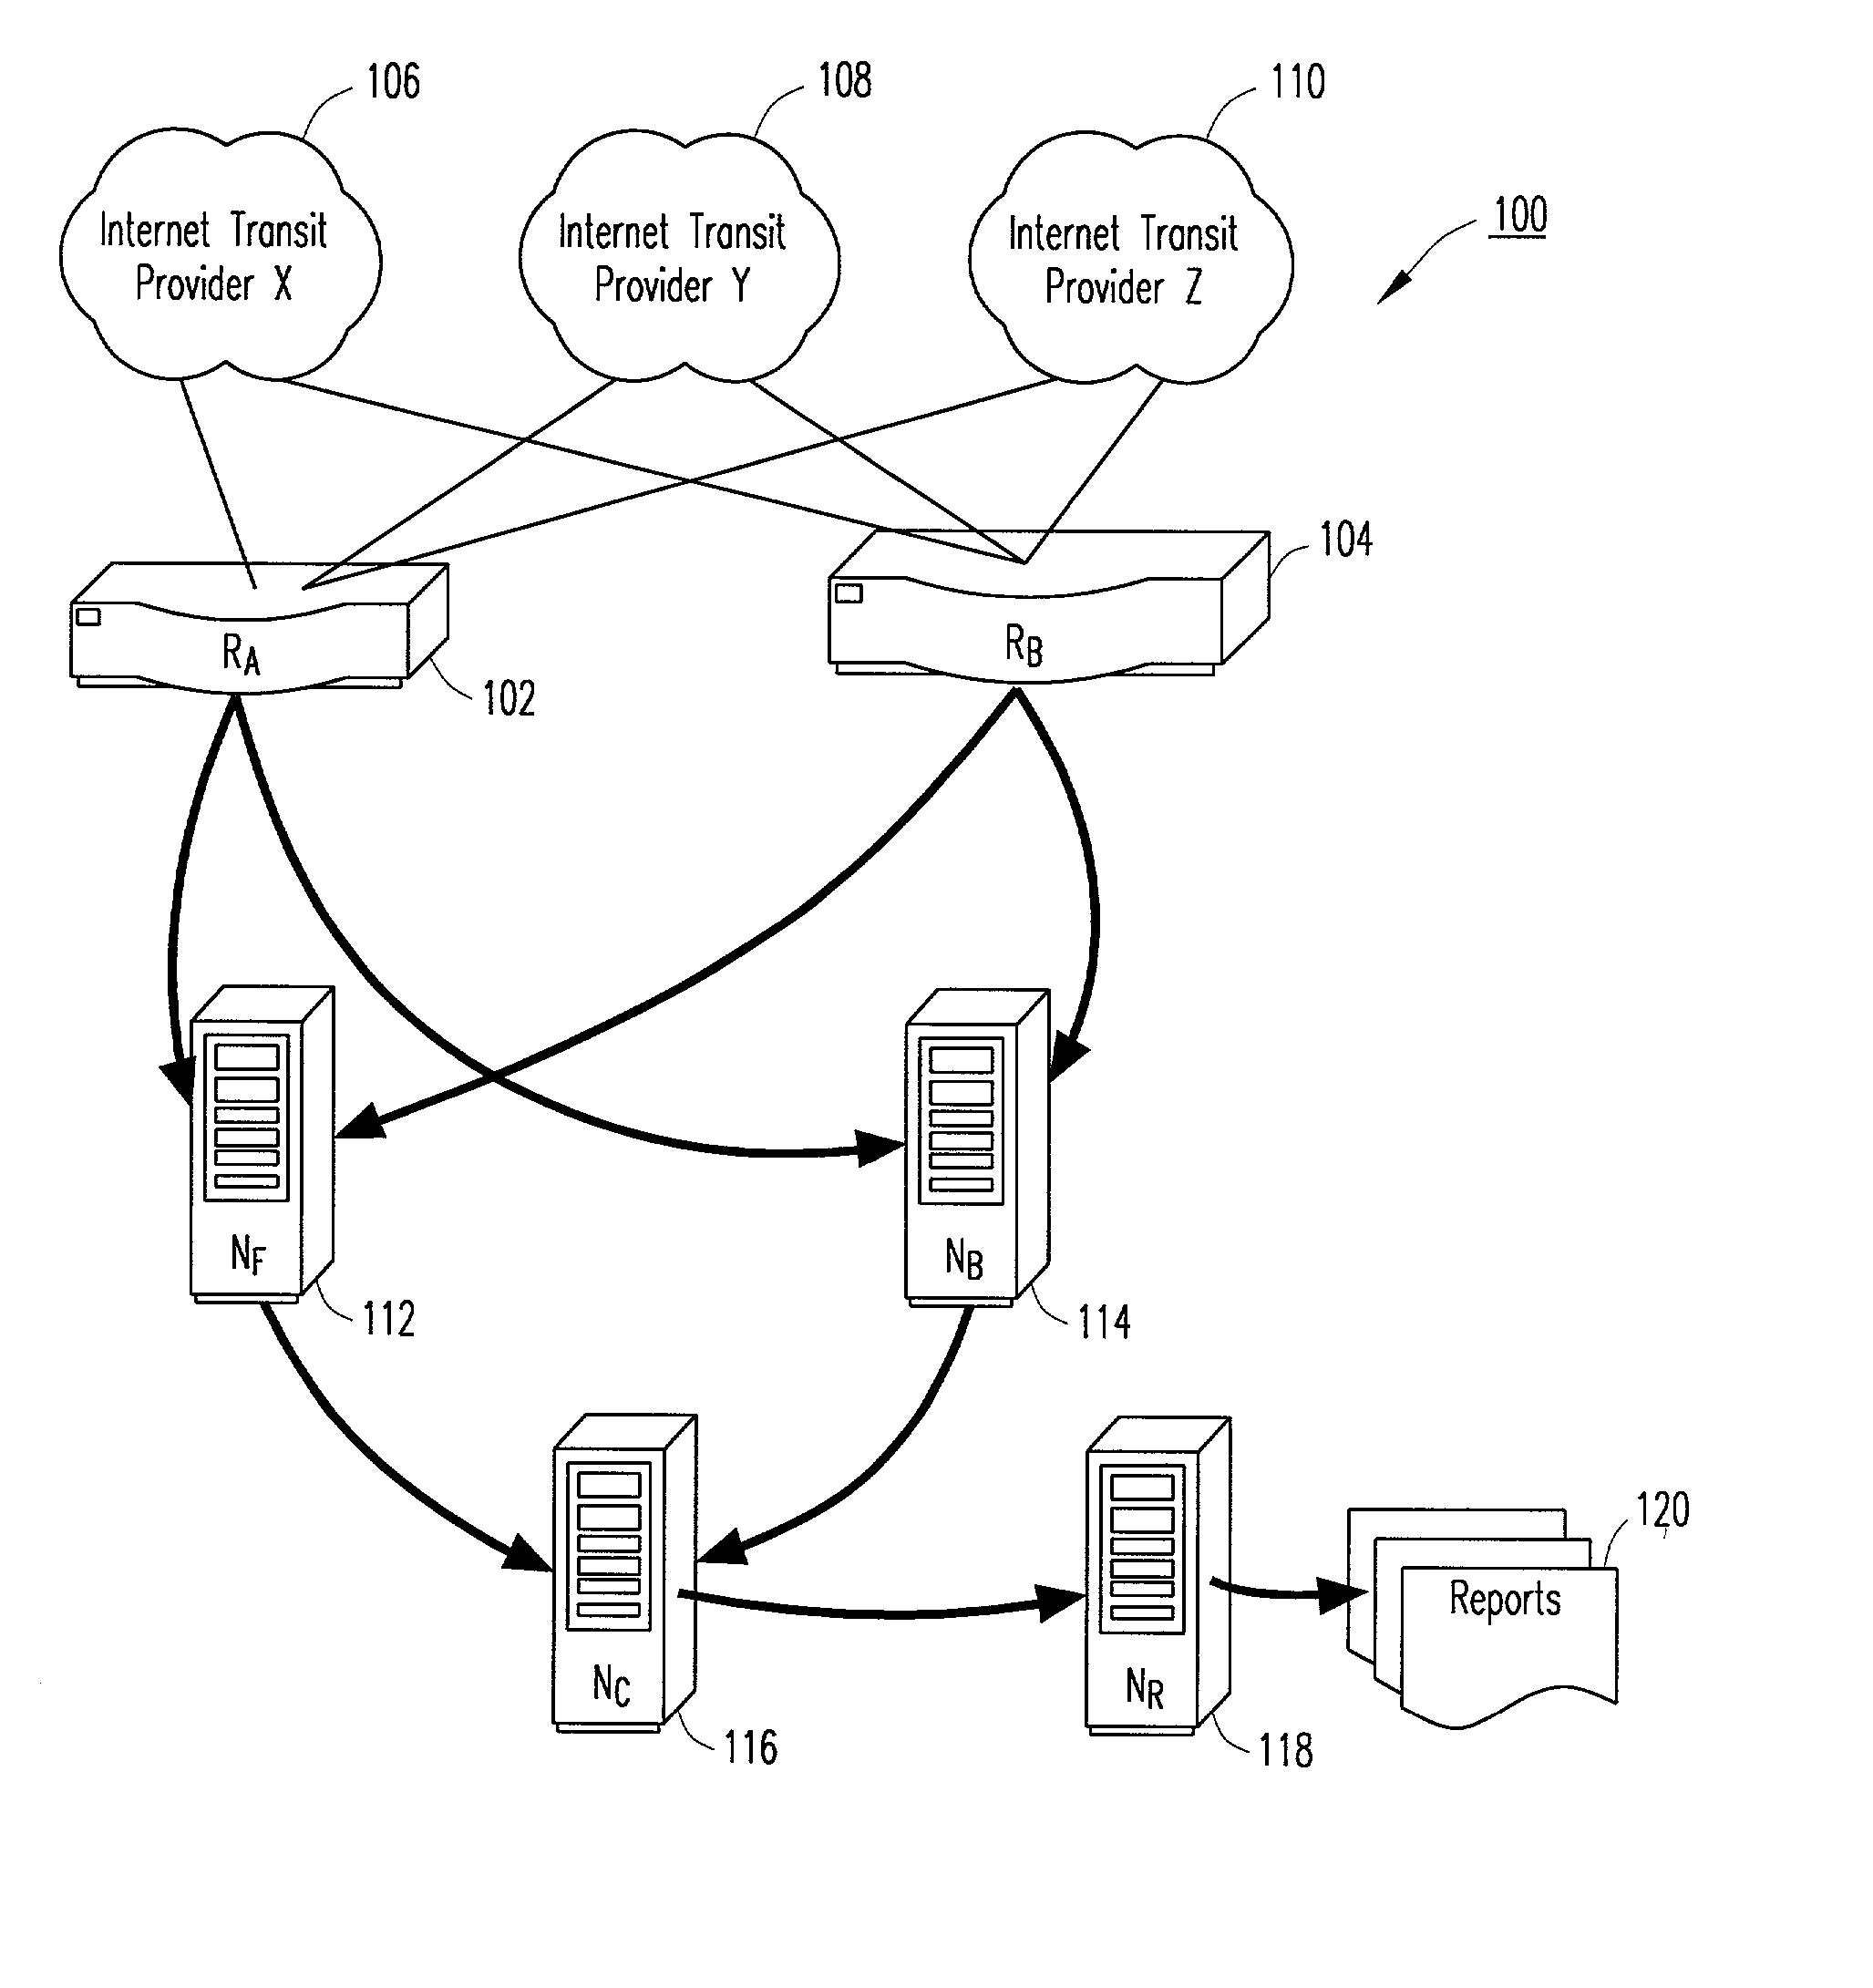 Method and system for determining autonomous system transit volumes